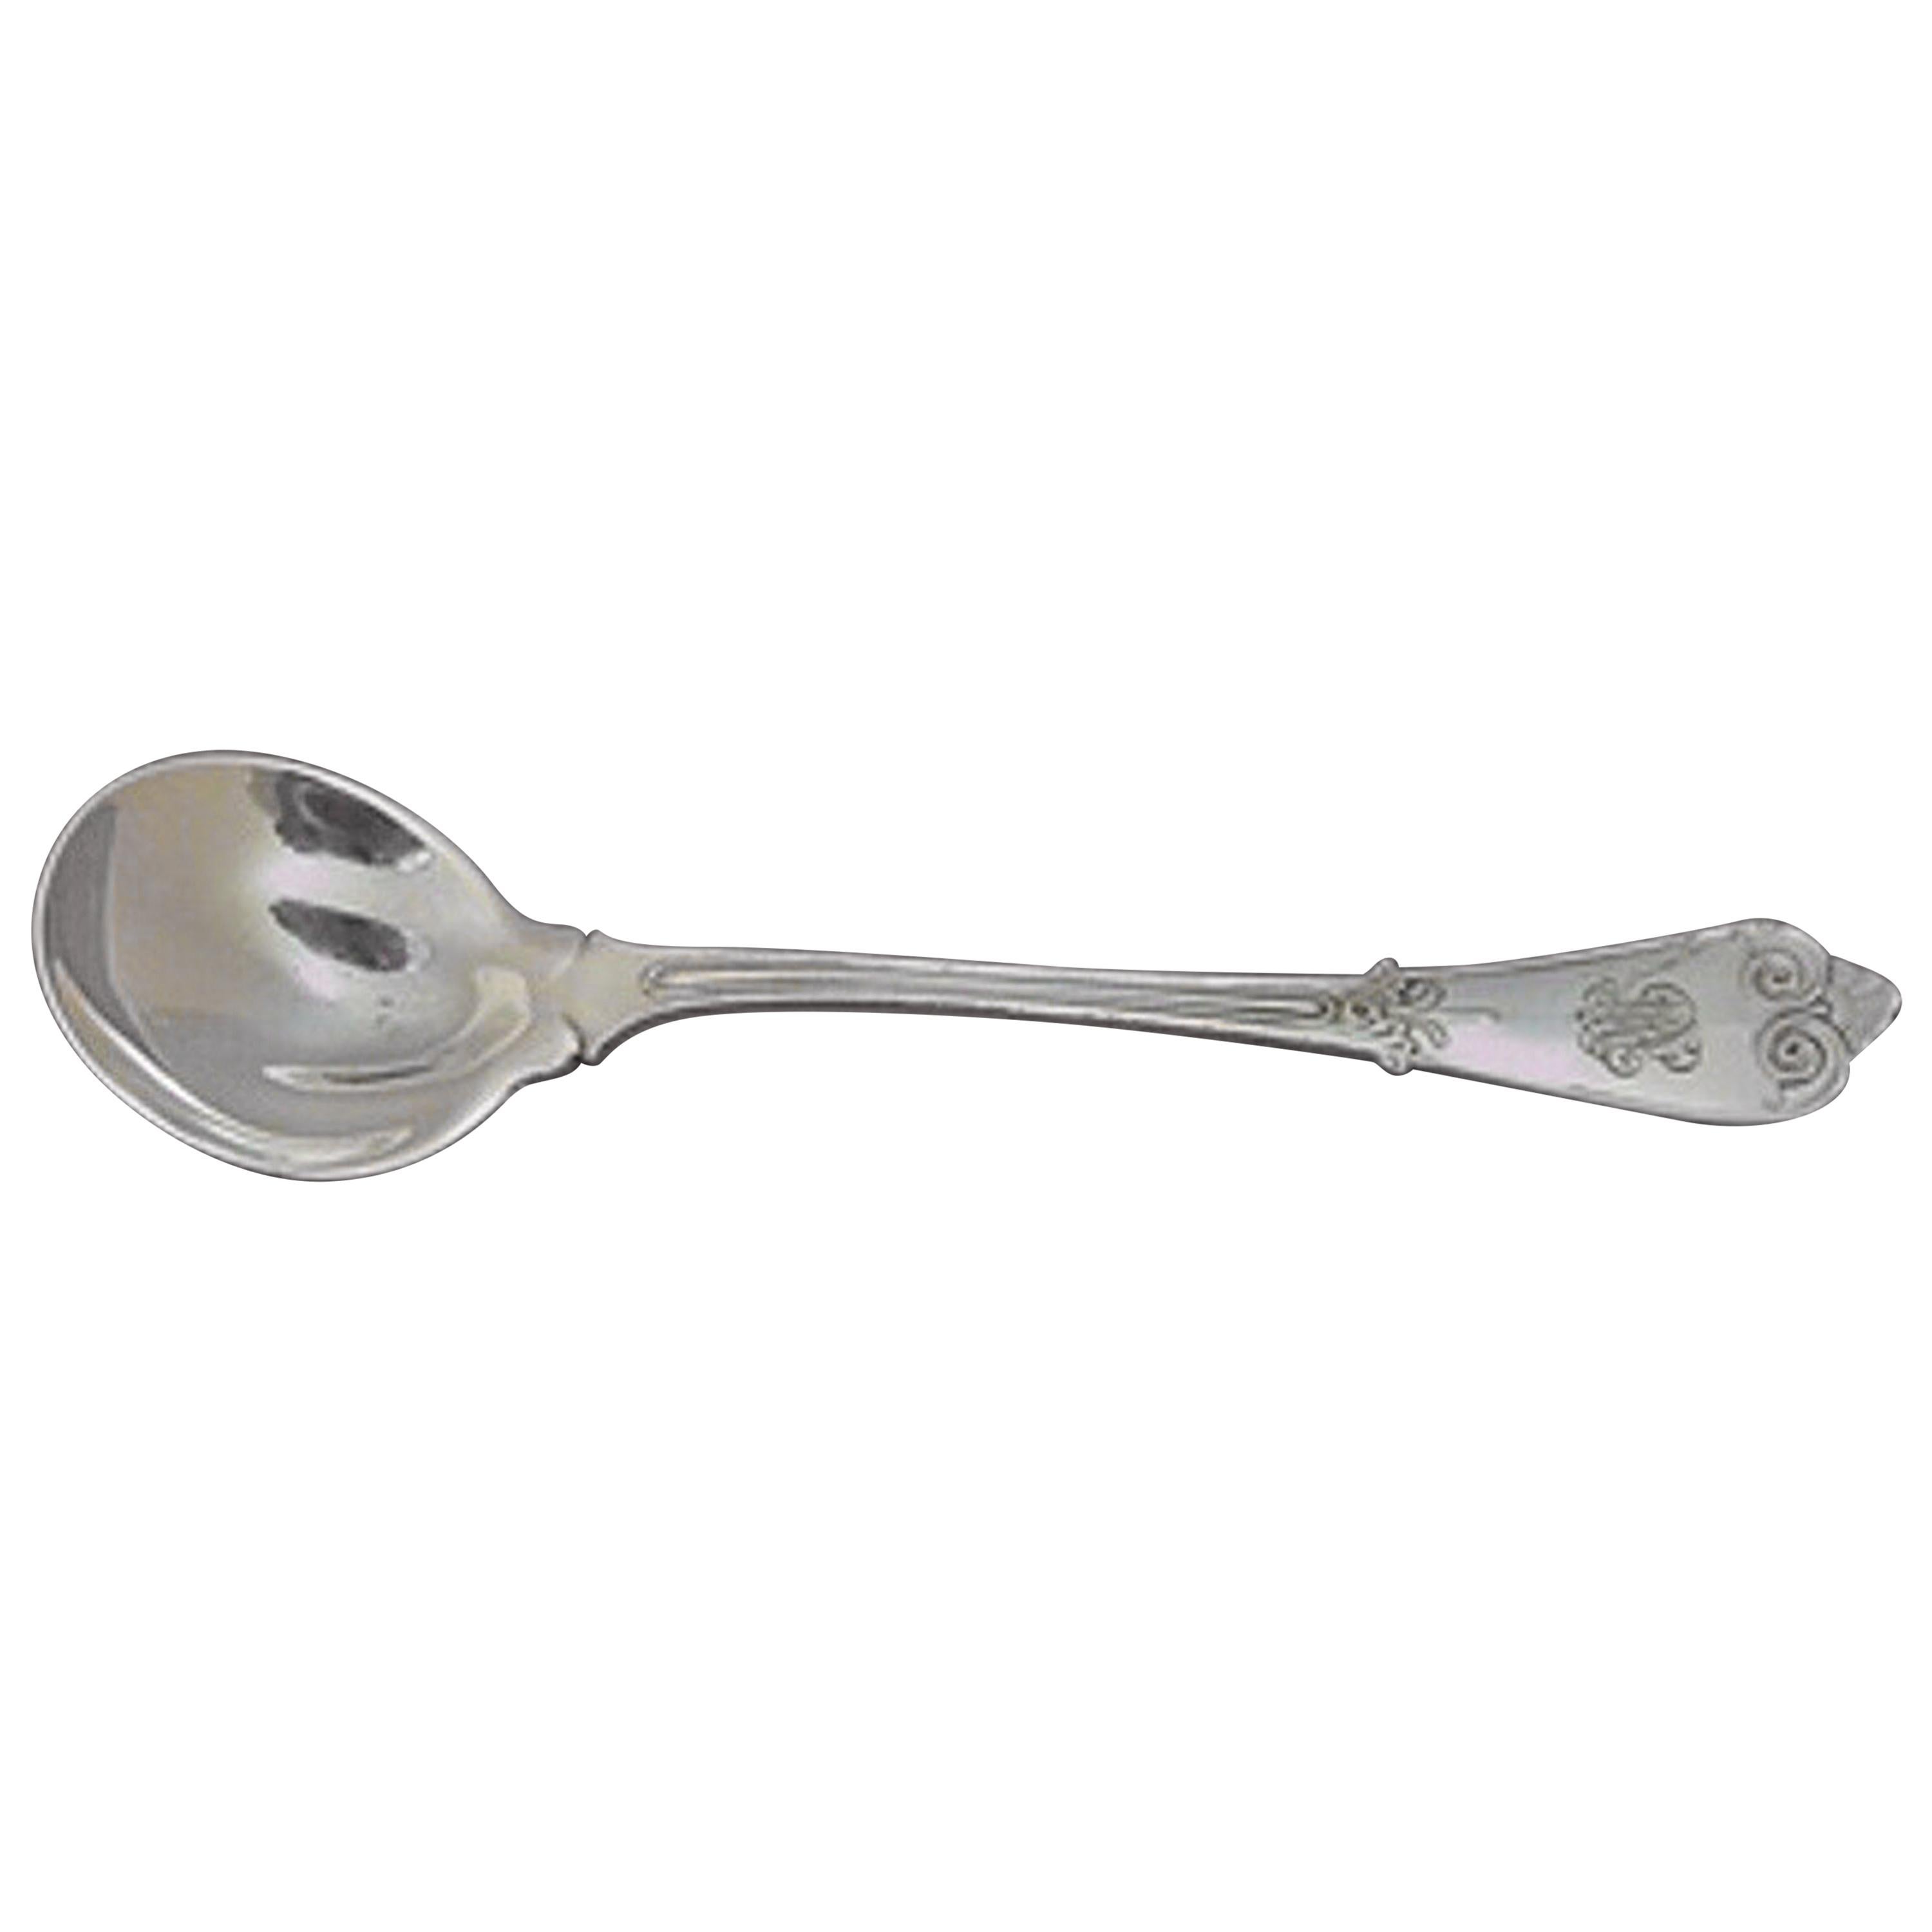 Beekman by Tiffany & Co. Sterling Silver Sherbet Spoon Pinched Antique